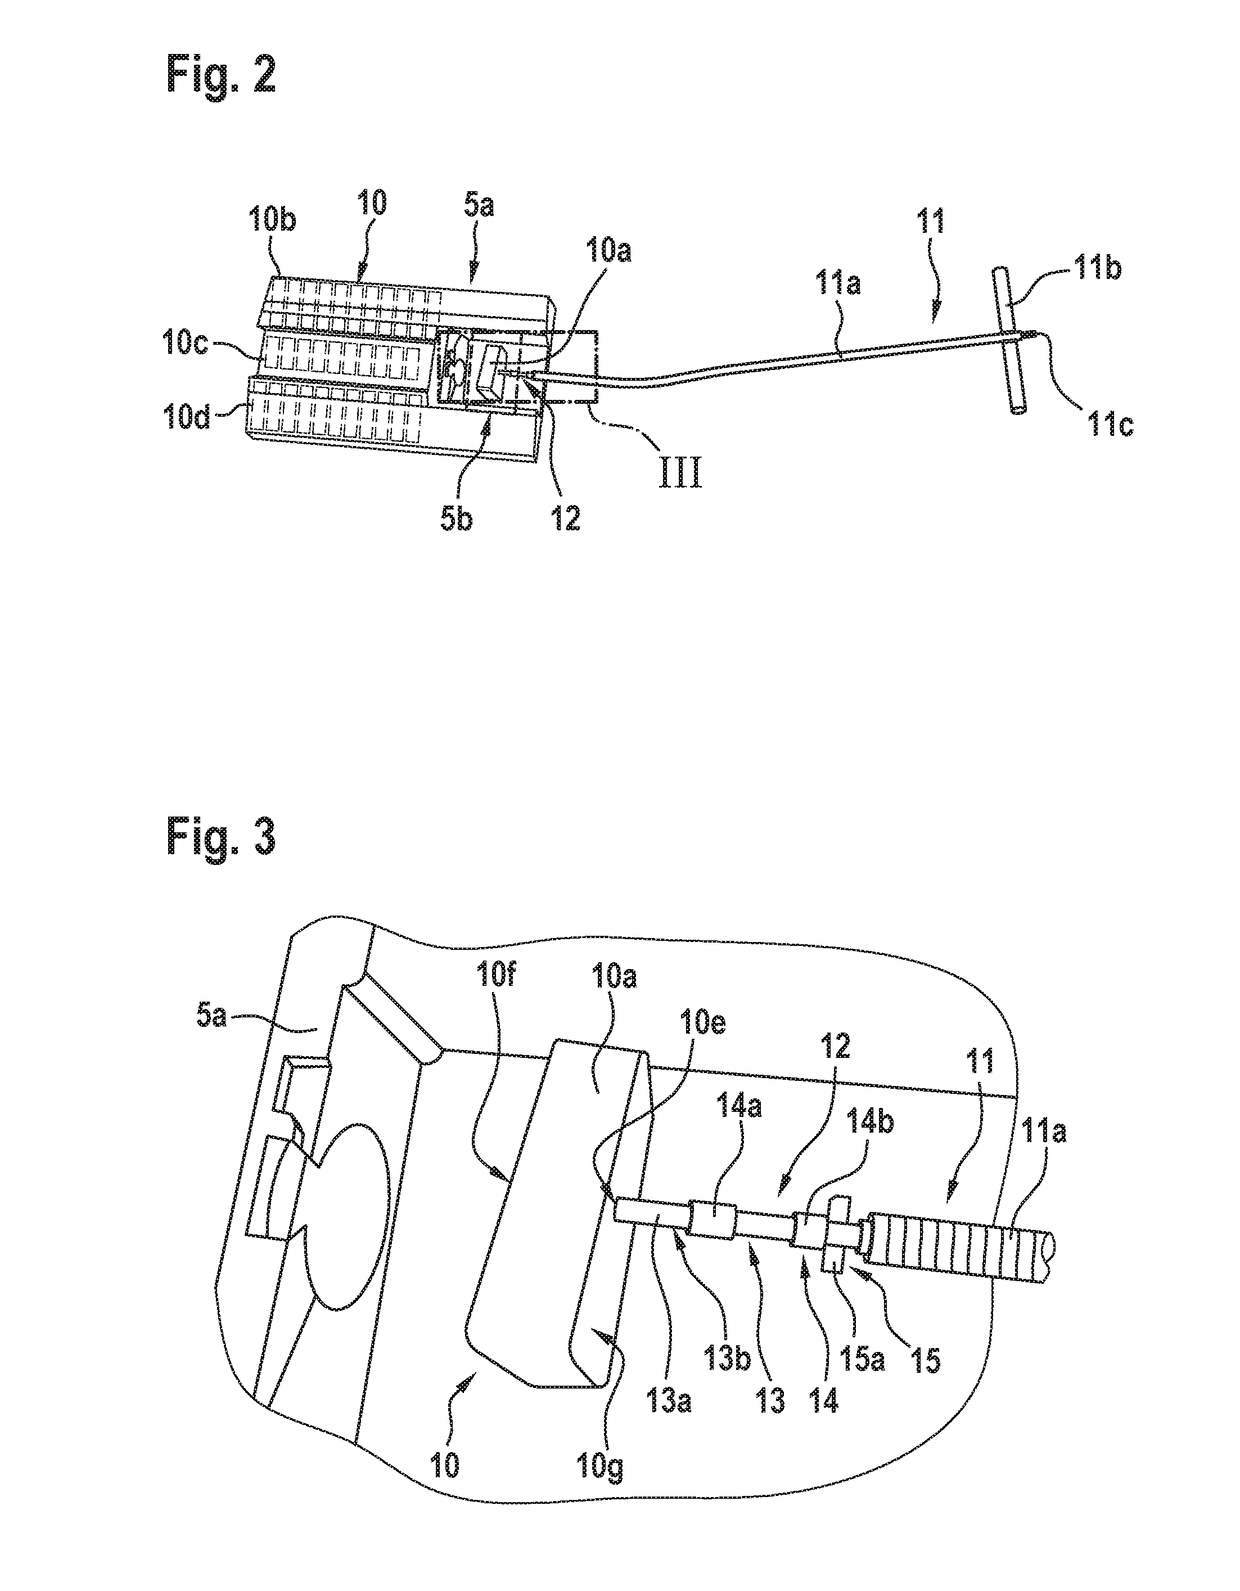 Extraction device for extracting a trim weight from a rotor blade